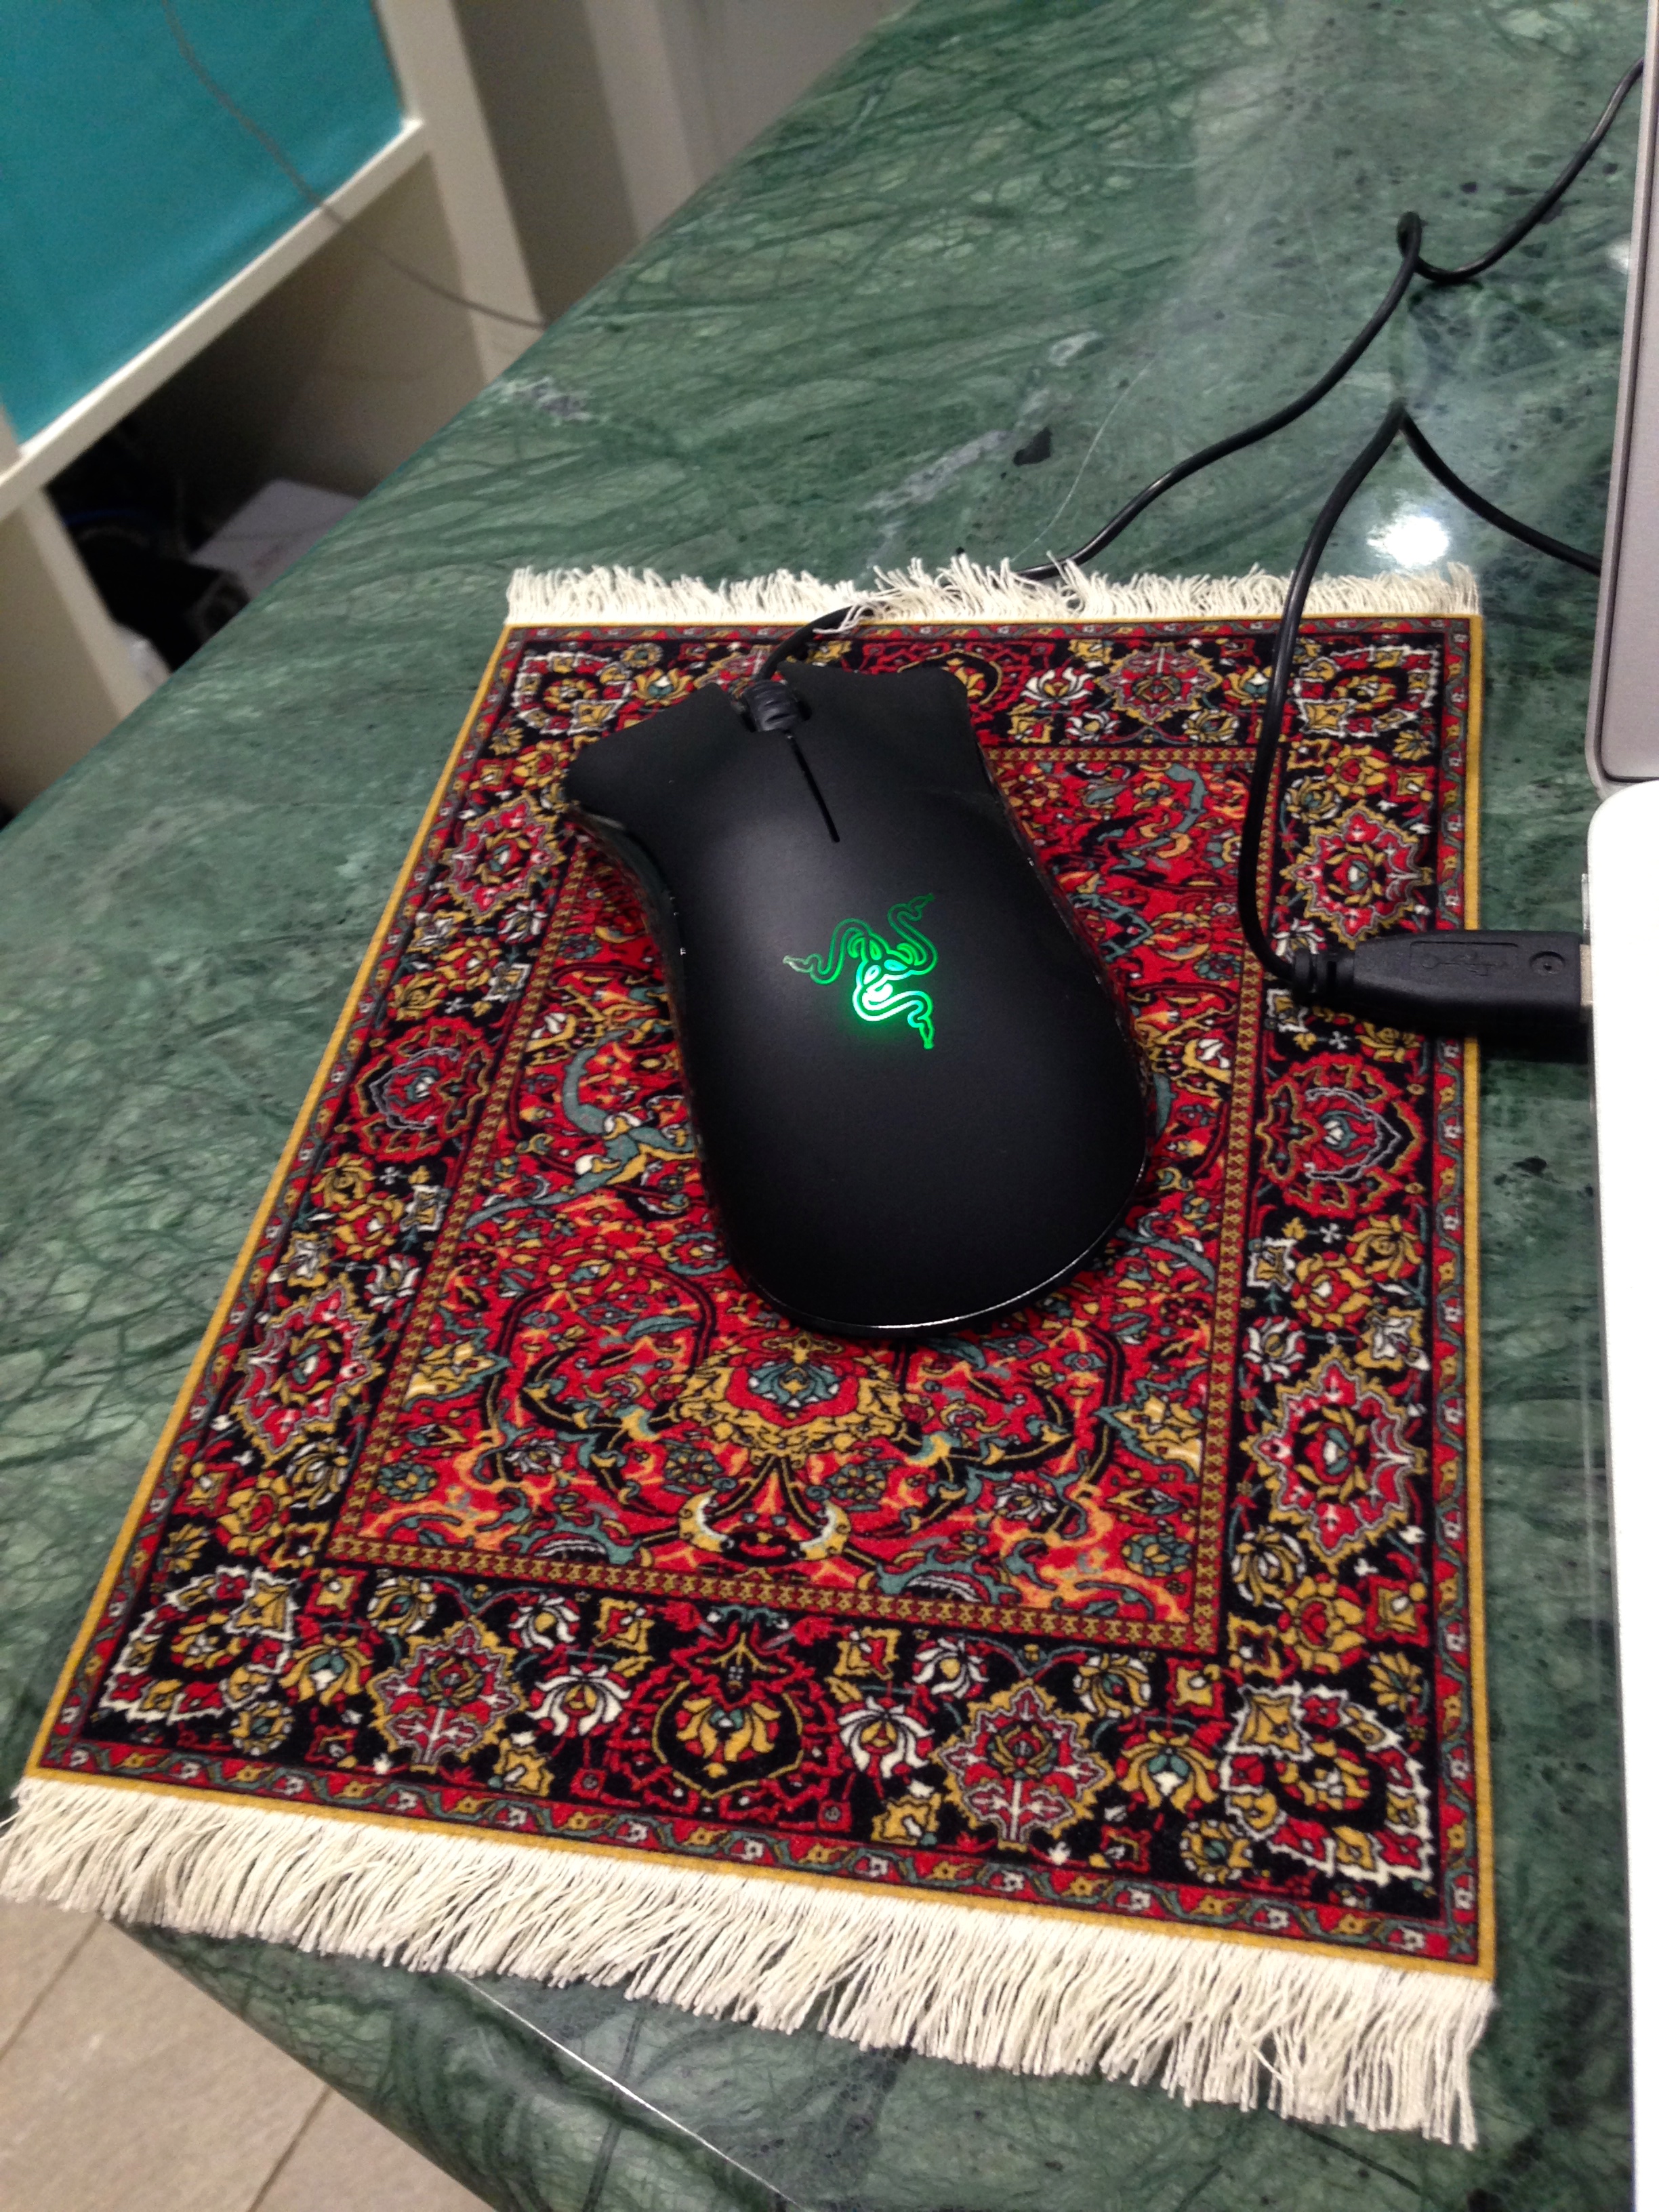 https://mythoughtlane.files.wordpress.com/2016/03/mouse-rug-with-mouse.jpg